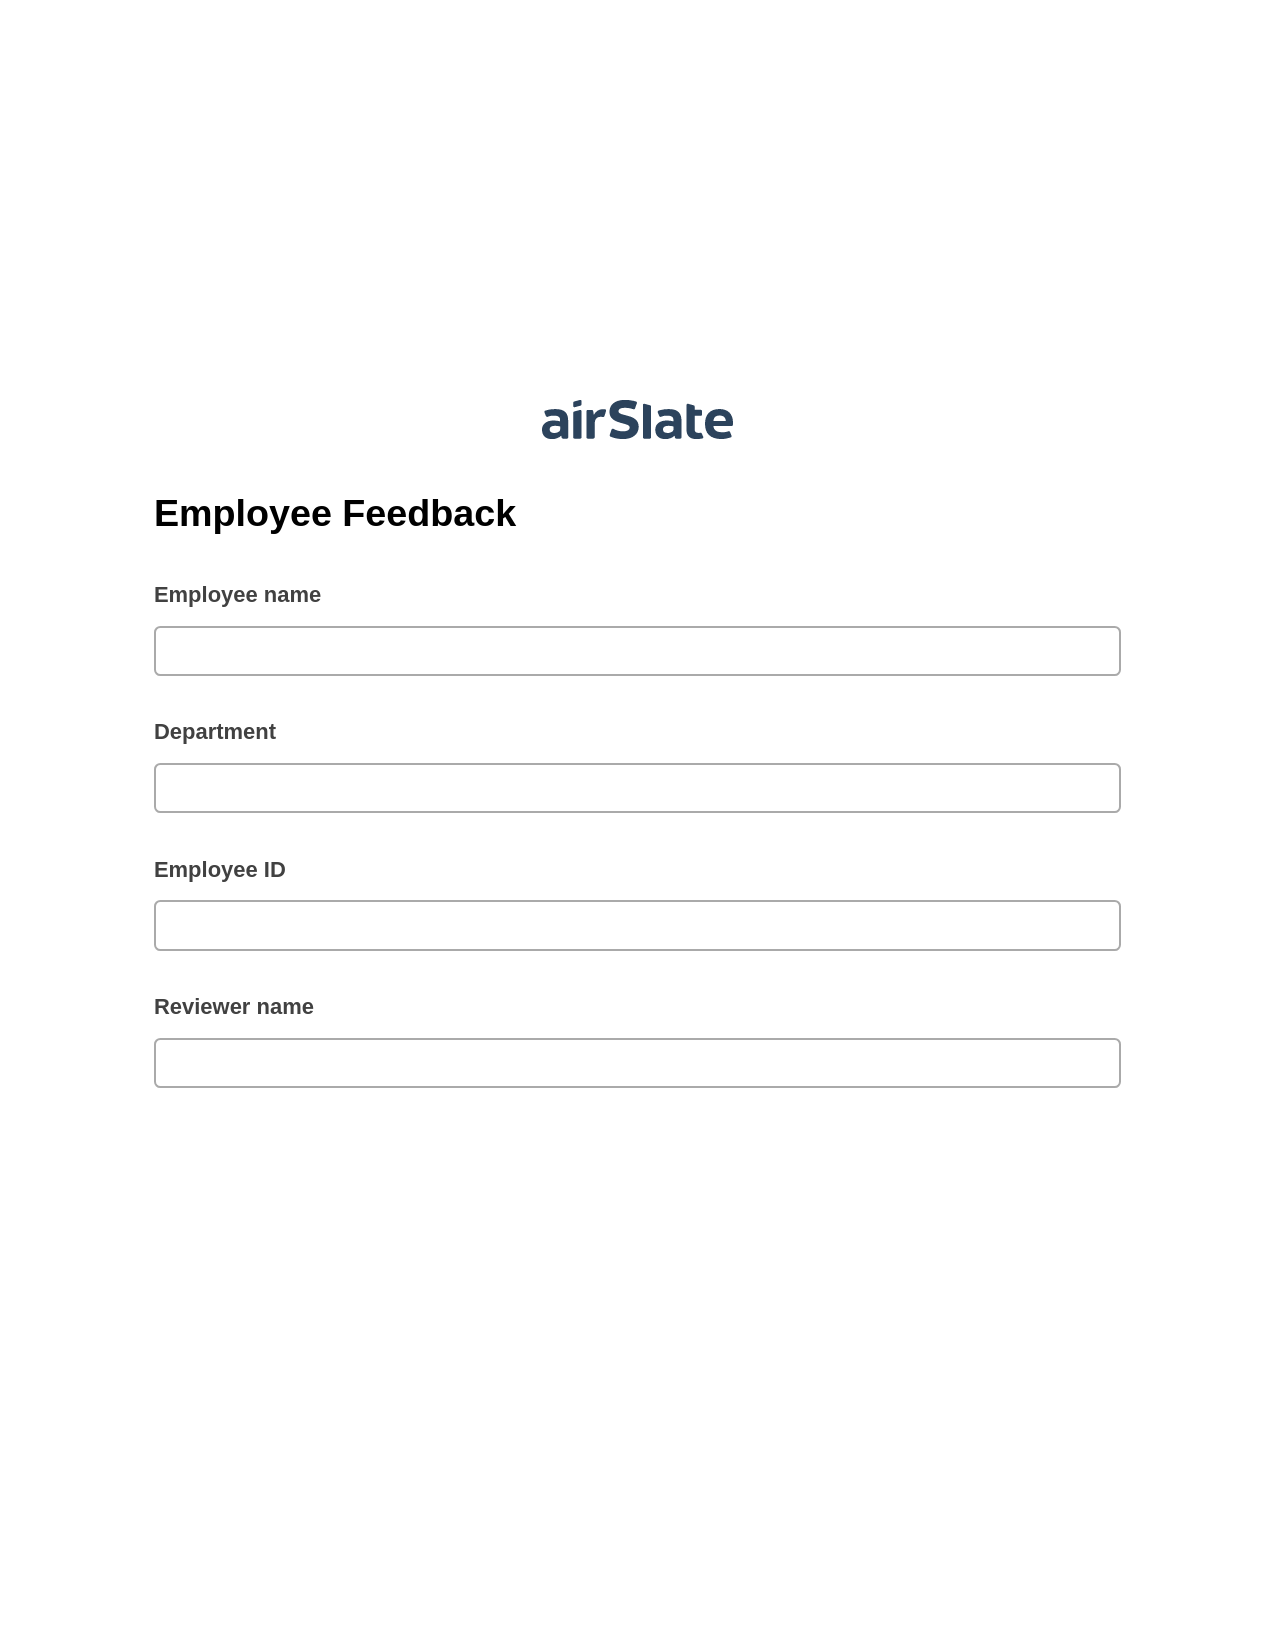 Employee Feedback Pre-fill from Google Sheet Dropdown Options Bot, Send a Slate with Roles Bot, Archive to SharePoint Folder Bot